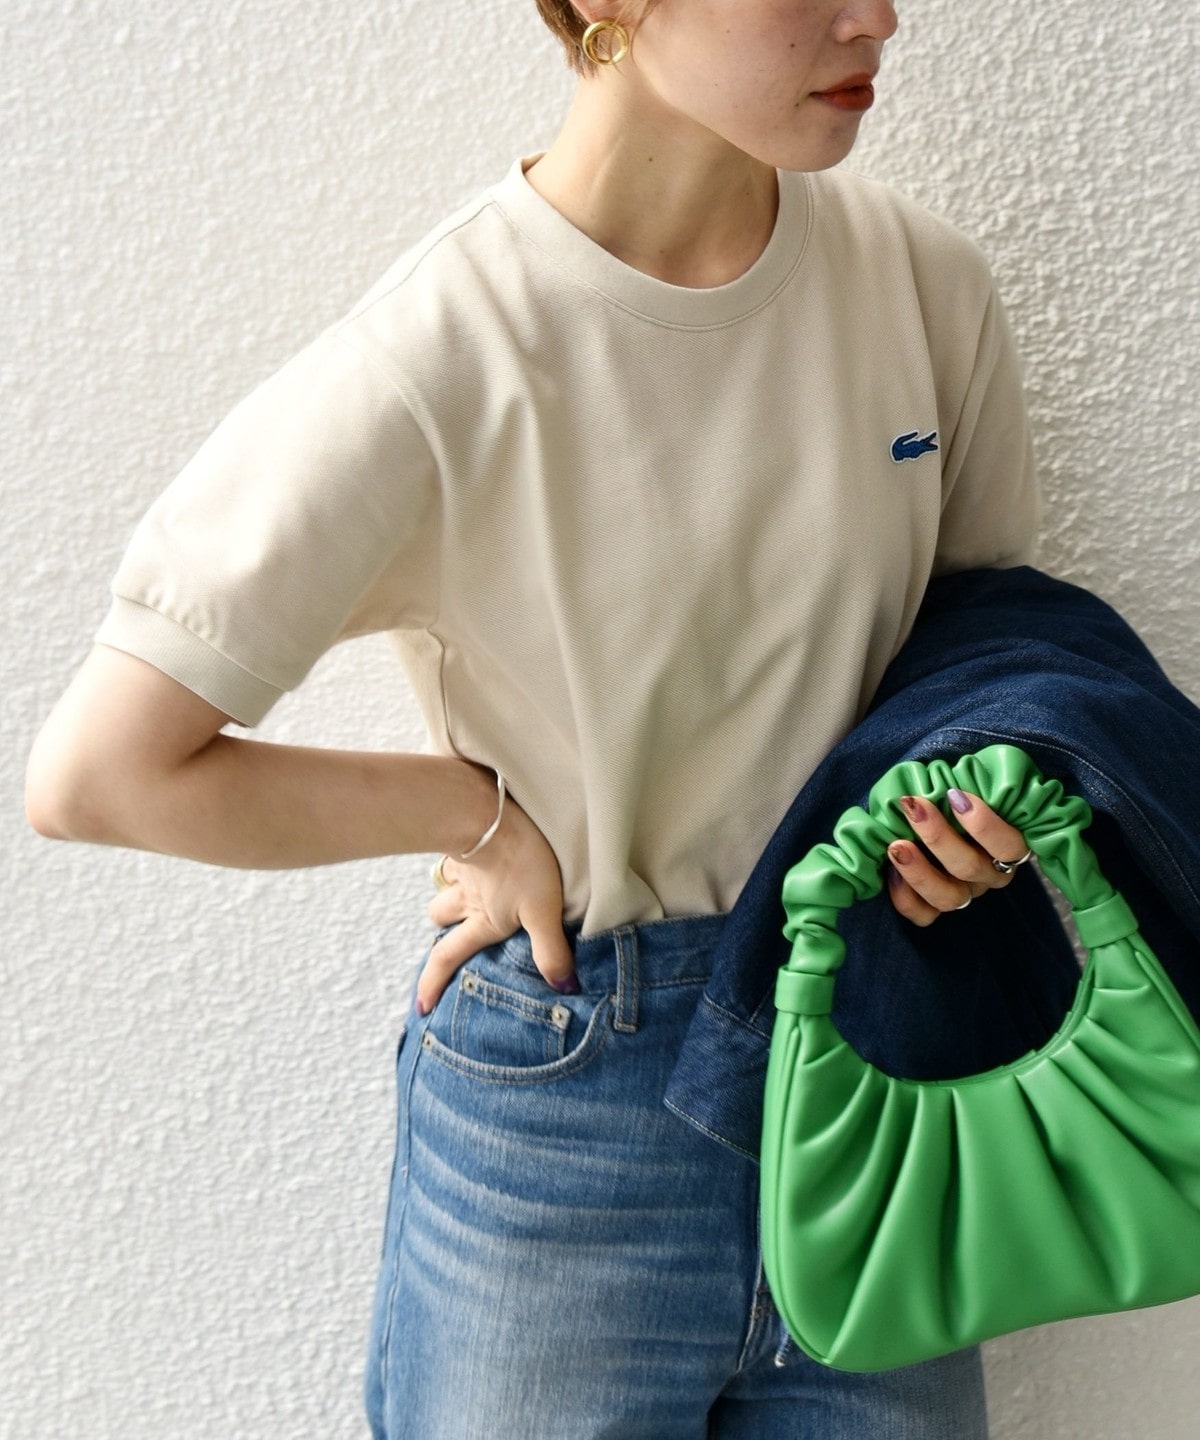 SHIPS any別注】LACOSTE: PIQUE クルーネック Tシャツ 23SS: Tシャツ 